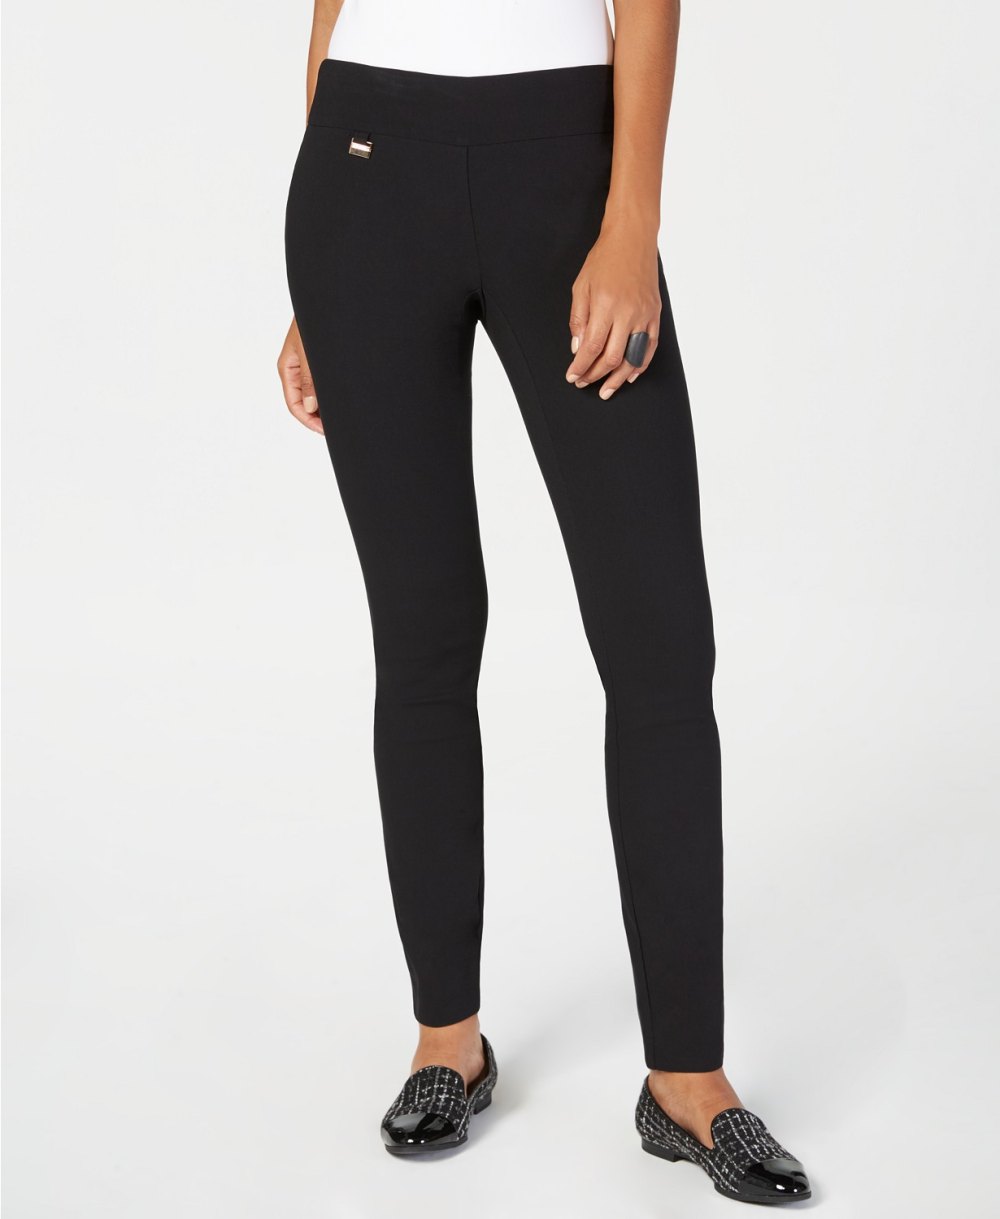 Shop Top-Rated Stomach Control Skinny Pants for Only $40